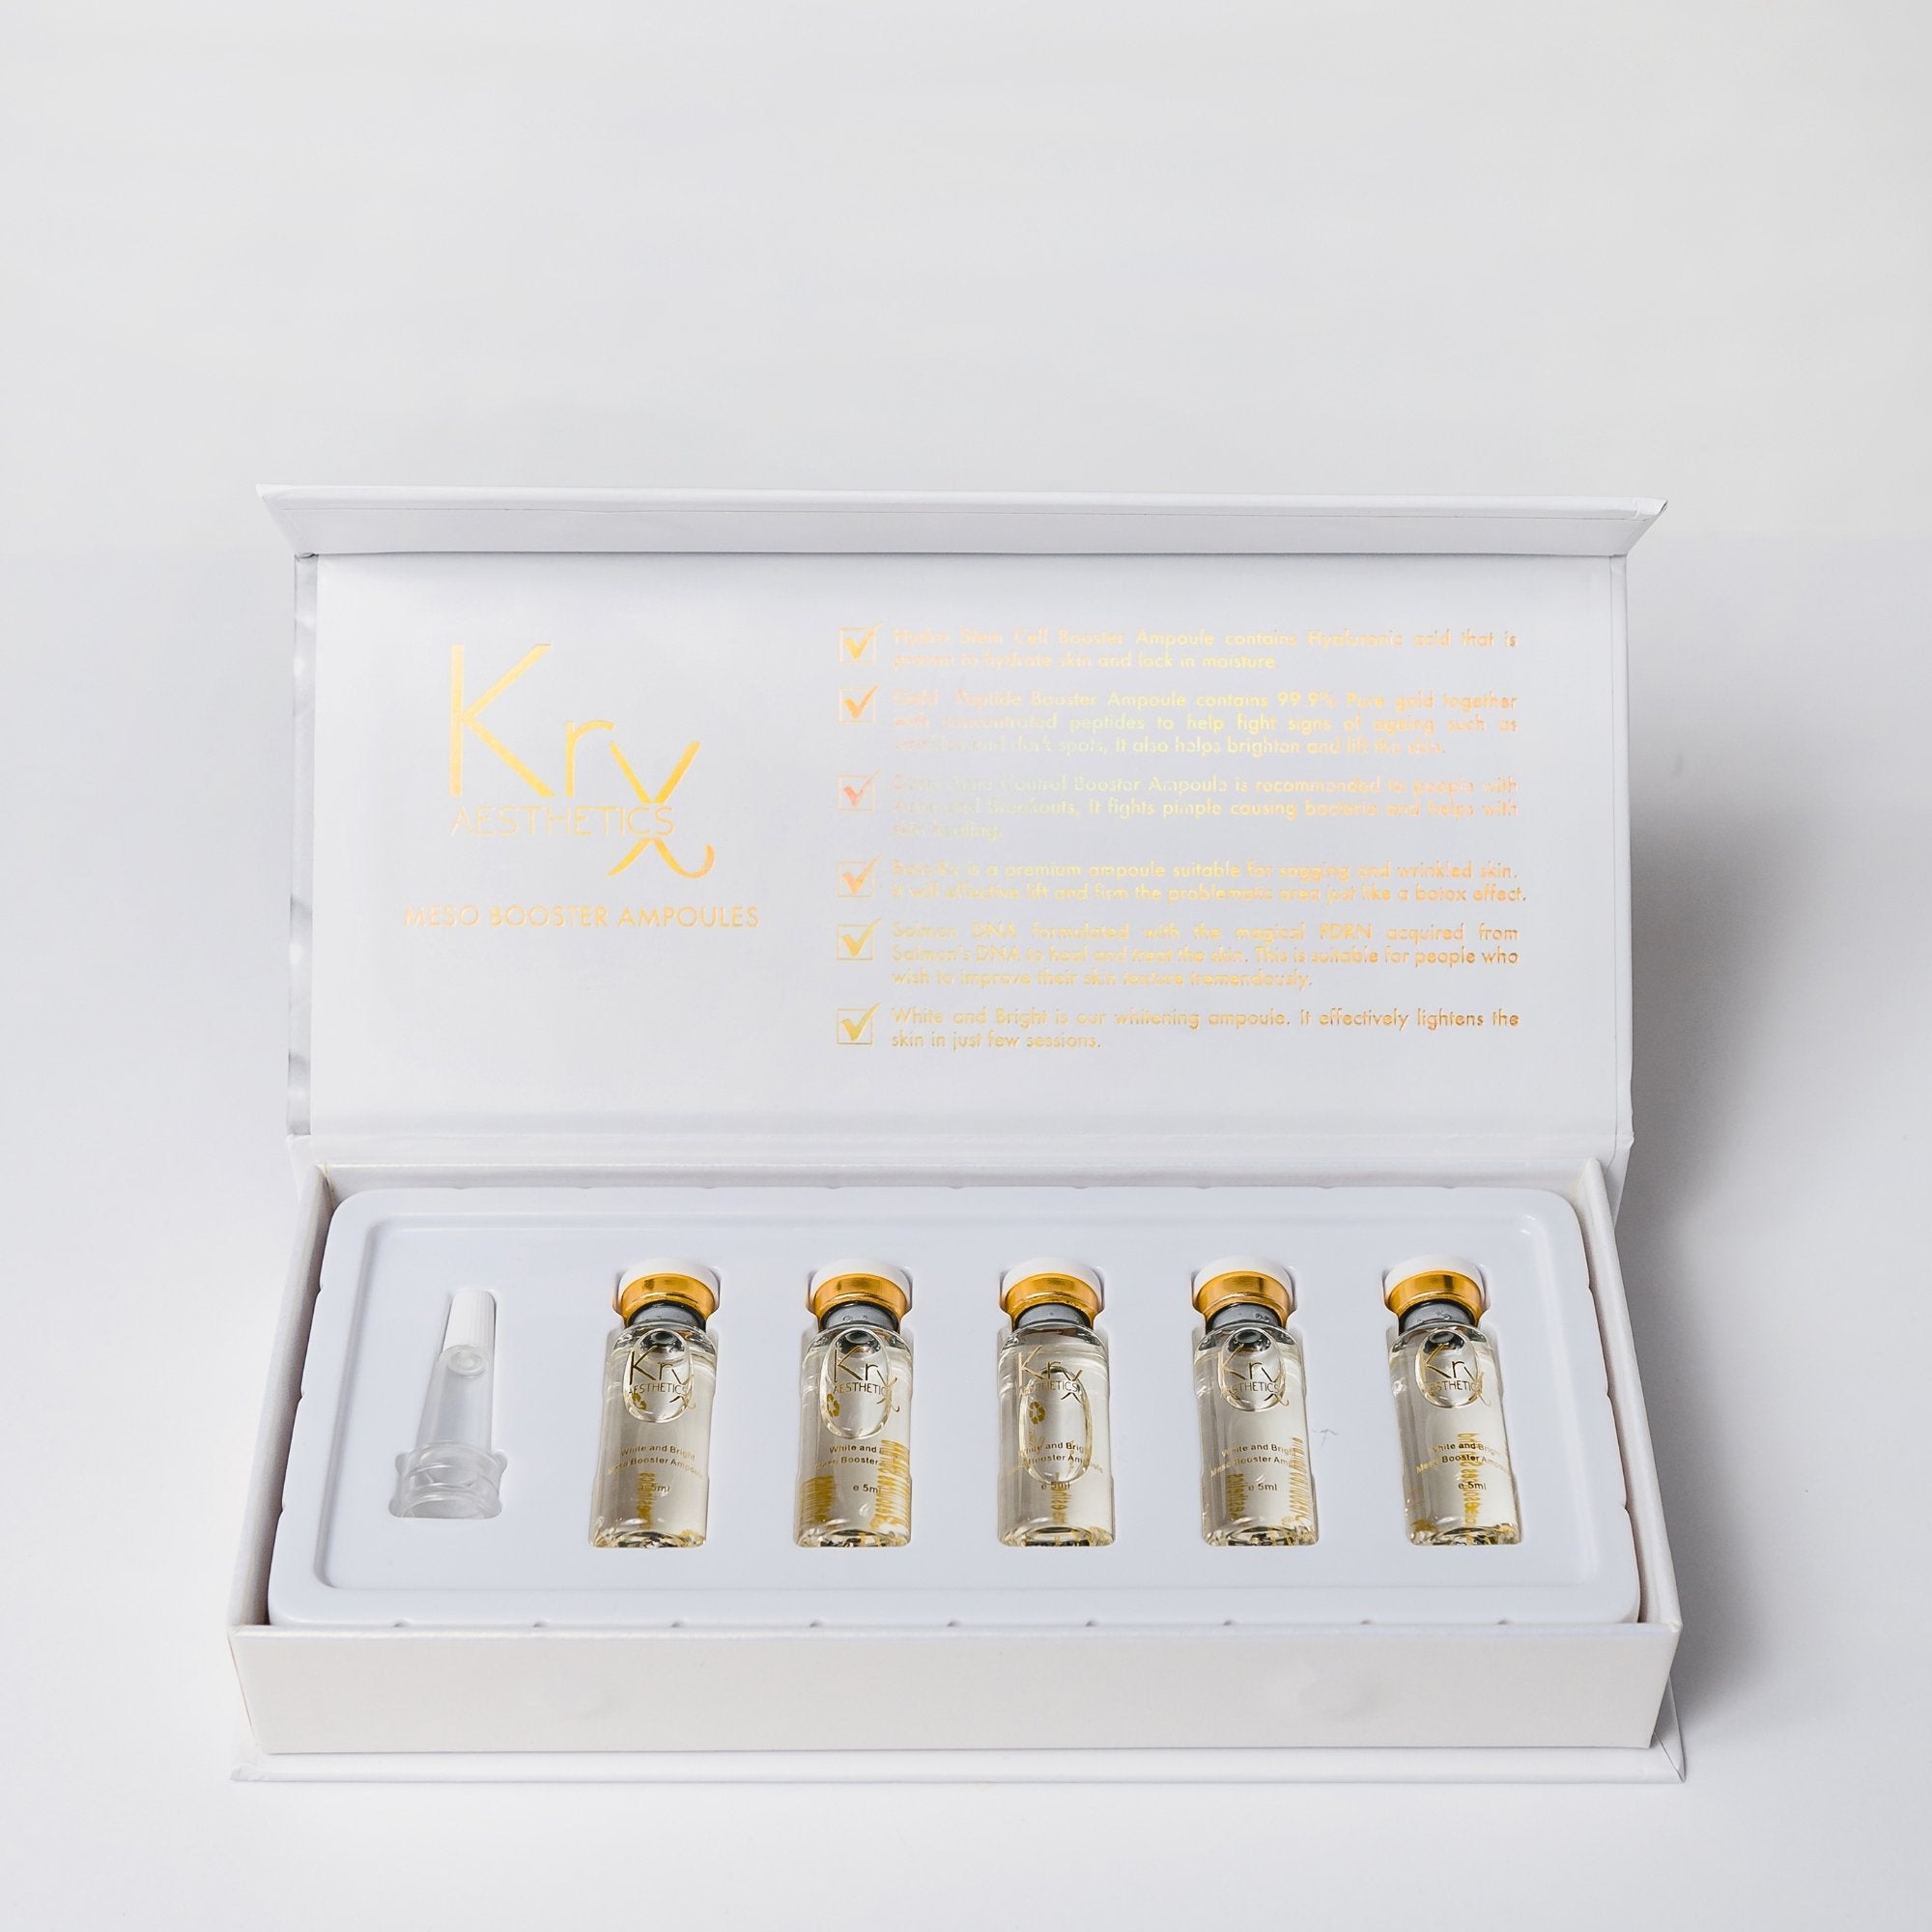 KrX Meso Booster Ampoule White and Bright - by Kin Aesthetics 